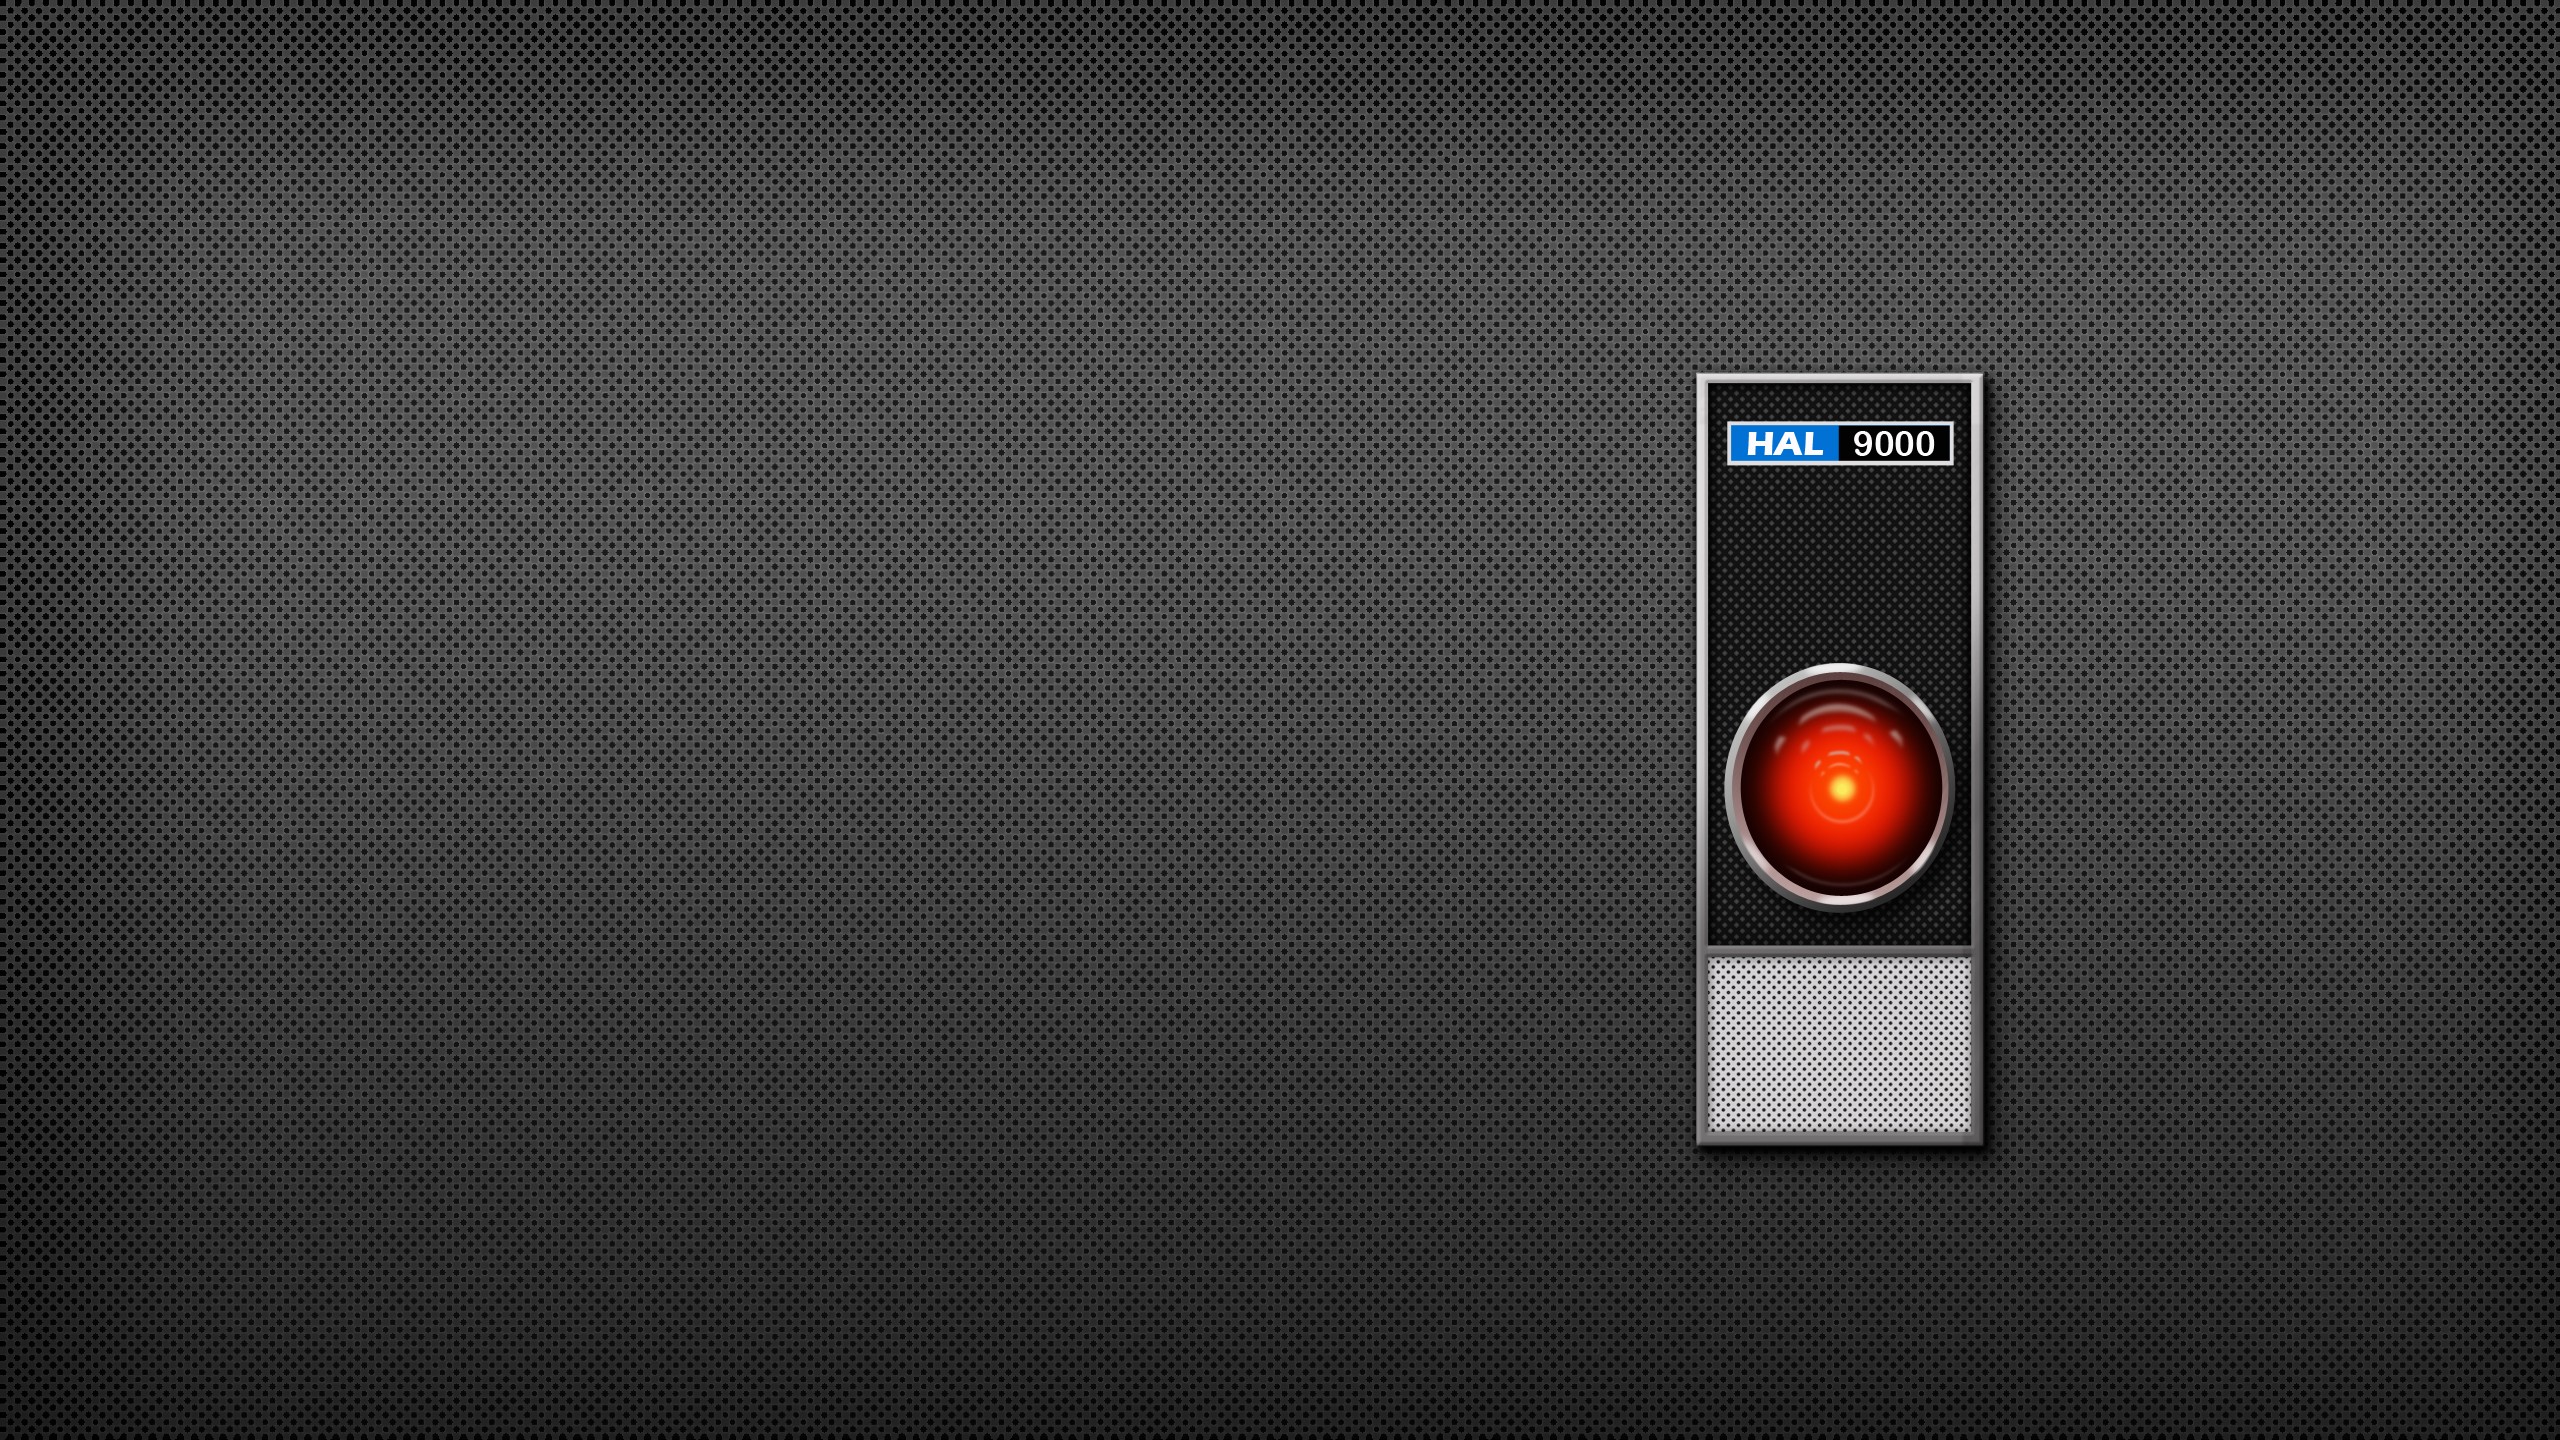 General 2560x1440 2001: A Space Odyssey HAL 9000 Stanley Kubrick science fiction computer simple background movies digital art minimalism